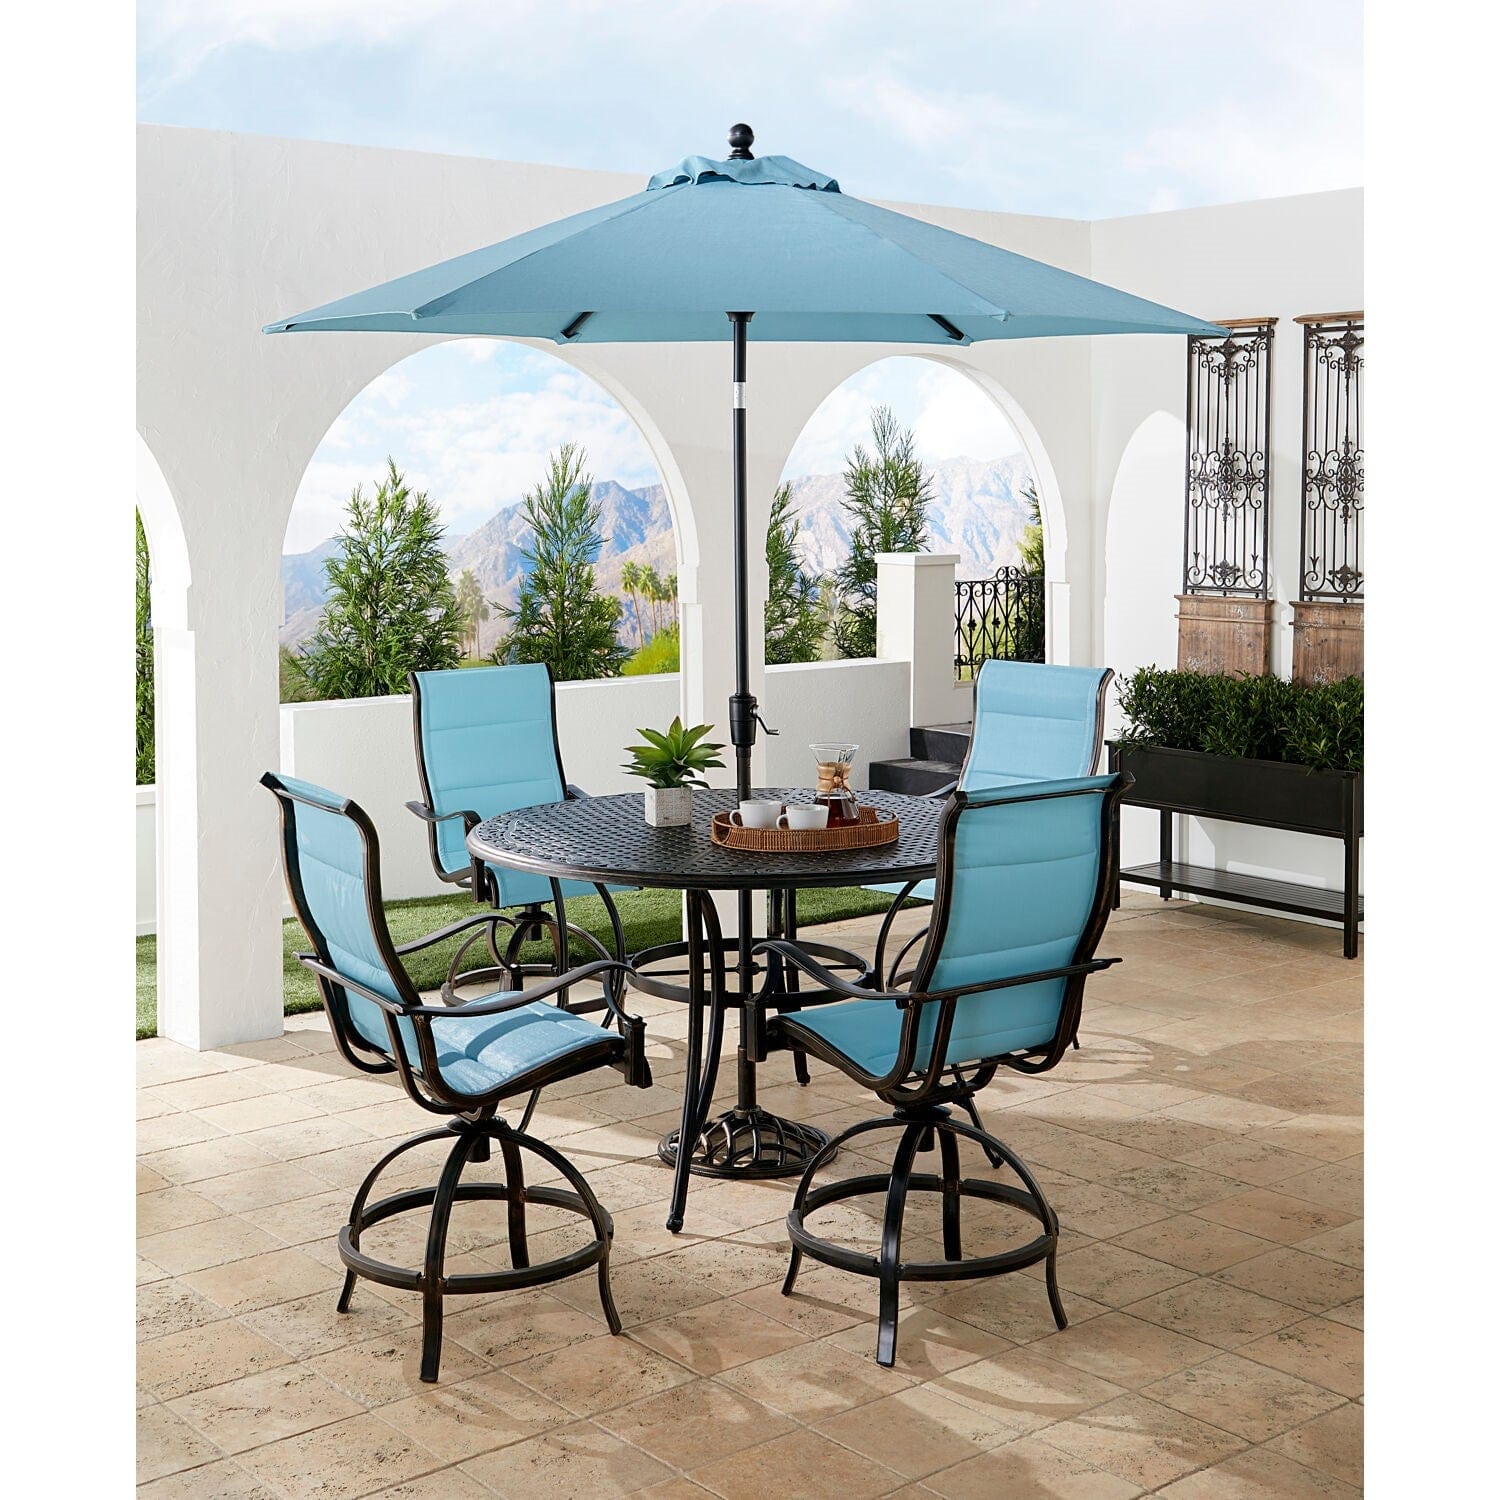 Hanover Outdoor Dining Set Hanover Traditions 5-Piece Aluminium Frame High-Dining Set in Blue with 4 Swivel Counter-Height Chairs, 56-in. Table, and 9-ft. Umbrella | TRADDN5PCPDBR-SU-B